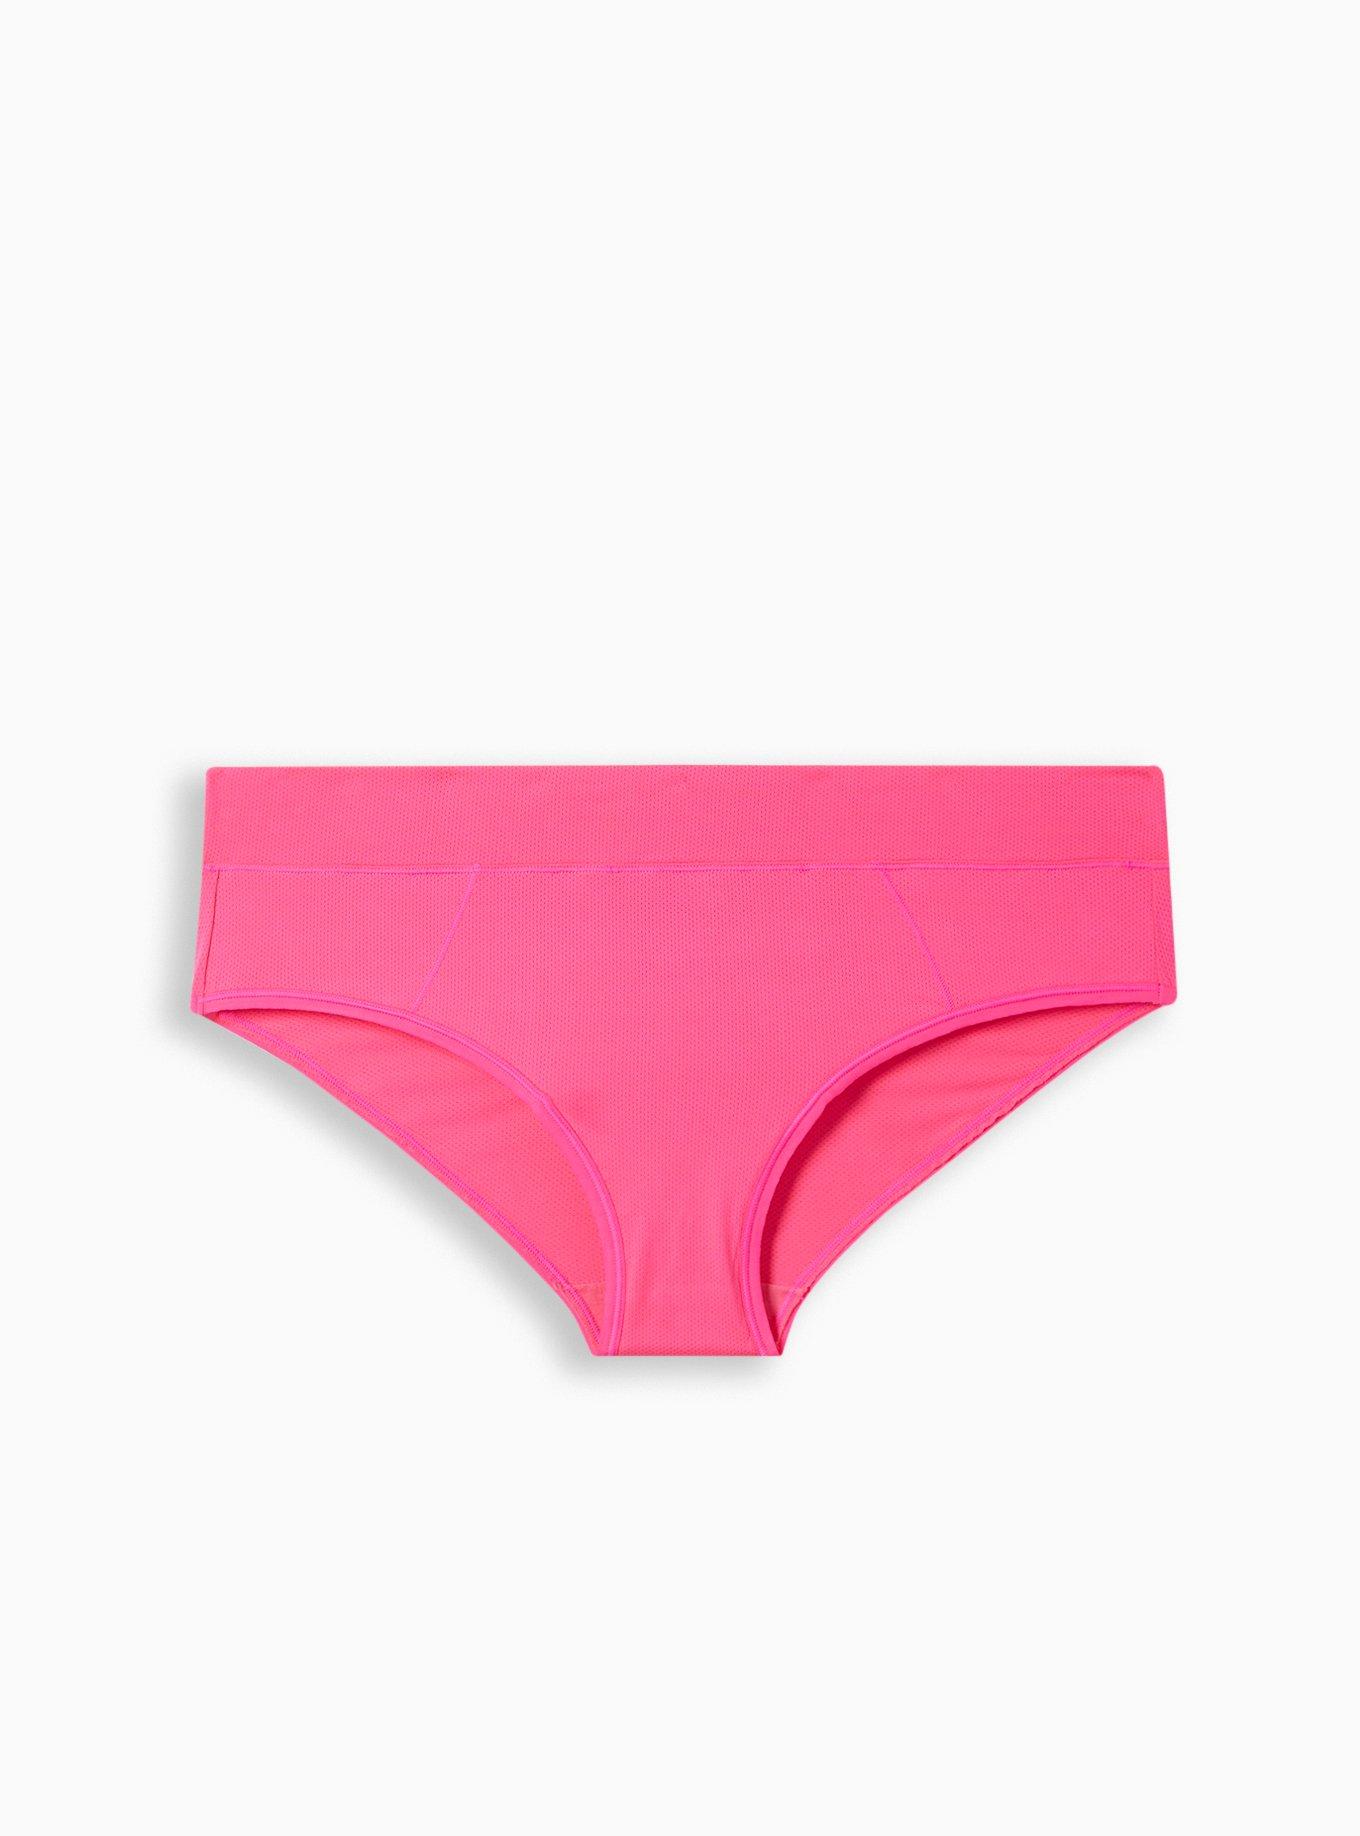 DRESS SEXY Free Size-Rose Pink Hipster Panty for Women || Underwear Brief  Panties || High Coverage Hipster Inner Wear || Solid Antibacterial Cotton